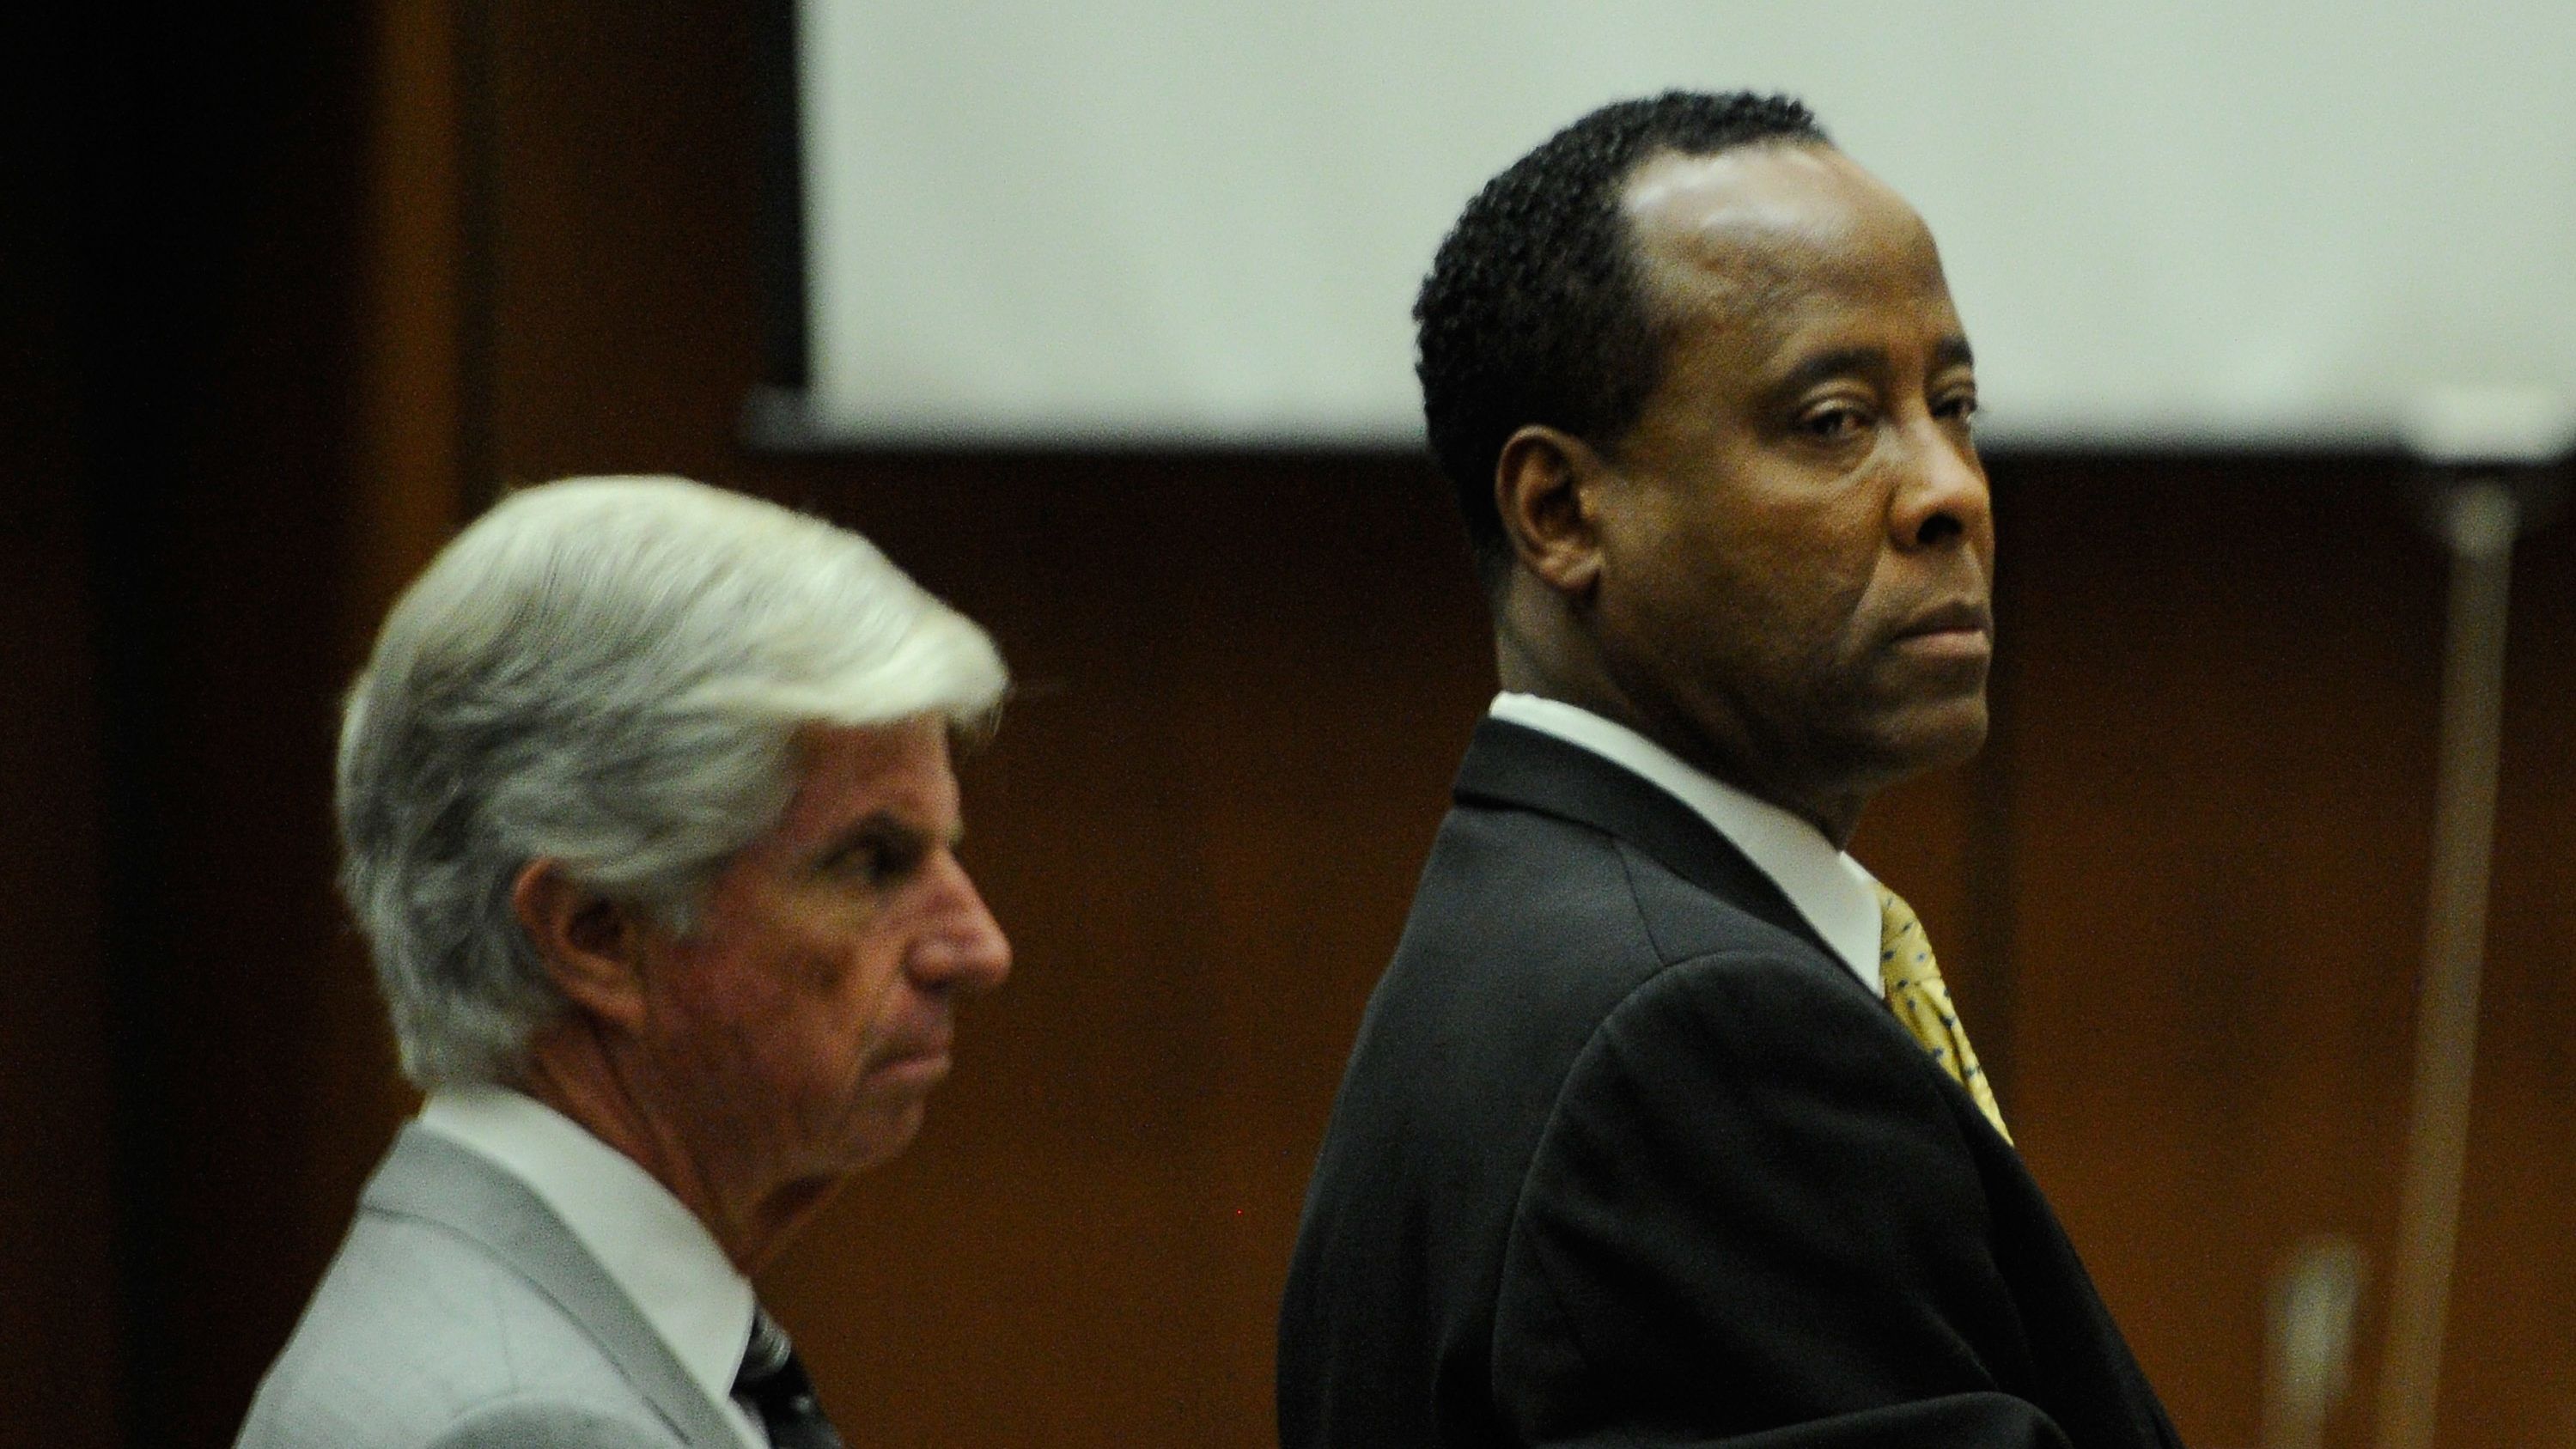  Dr. Conrad Murray, right, at his trial. He was convicted of involuntary manslaughter in the death of Michael Jackson .